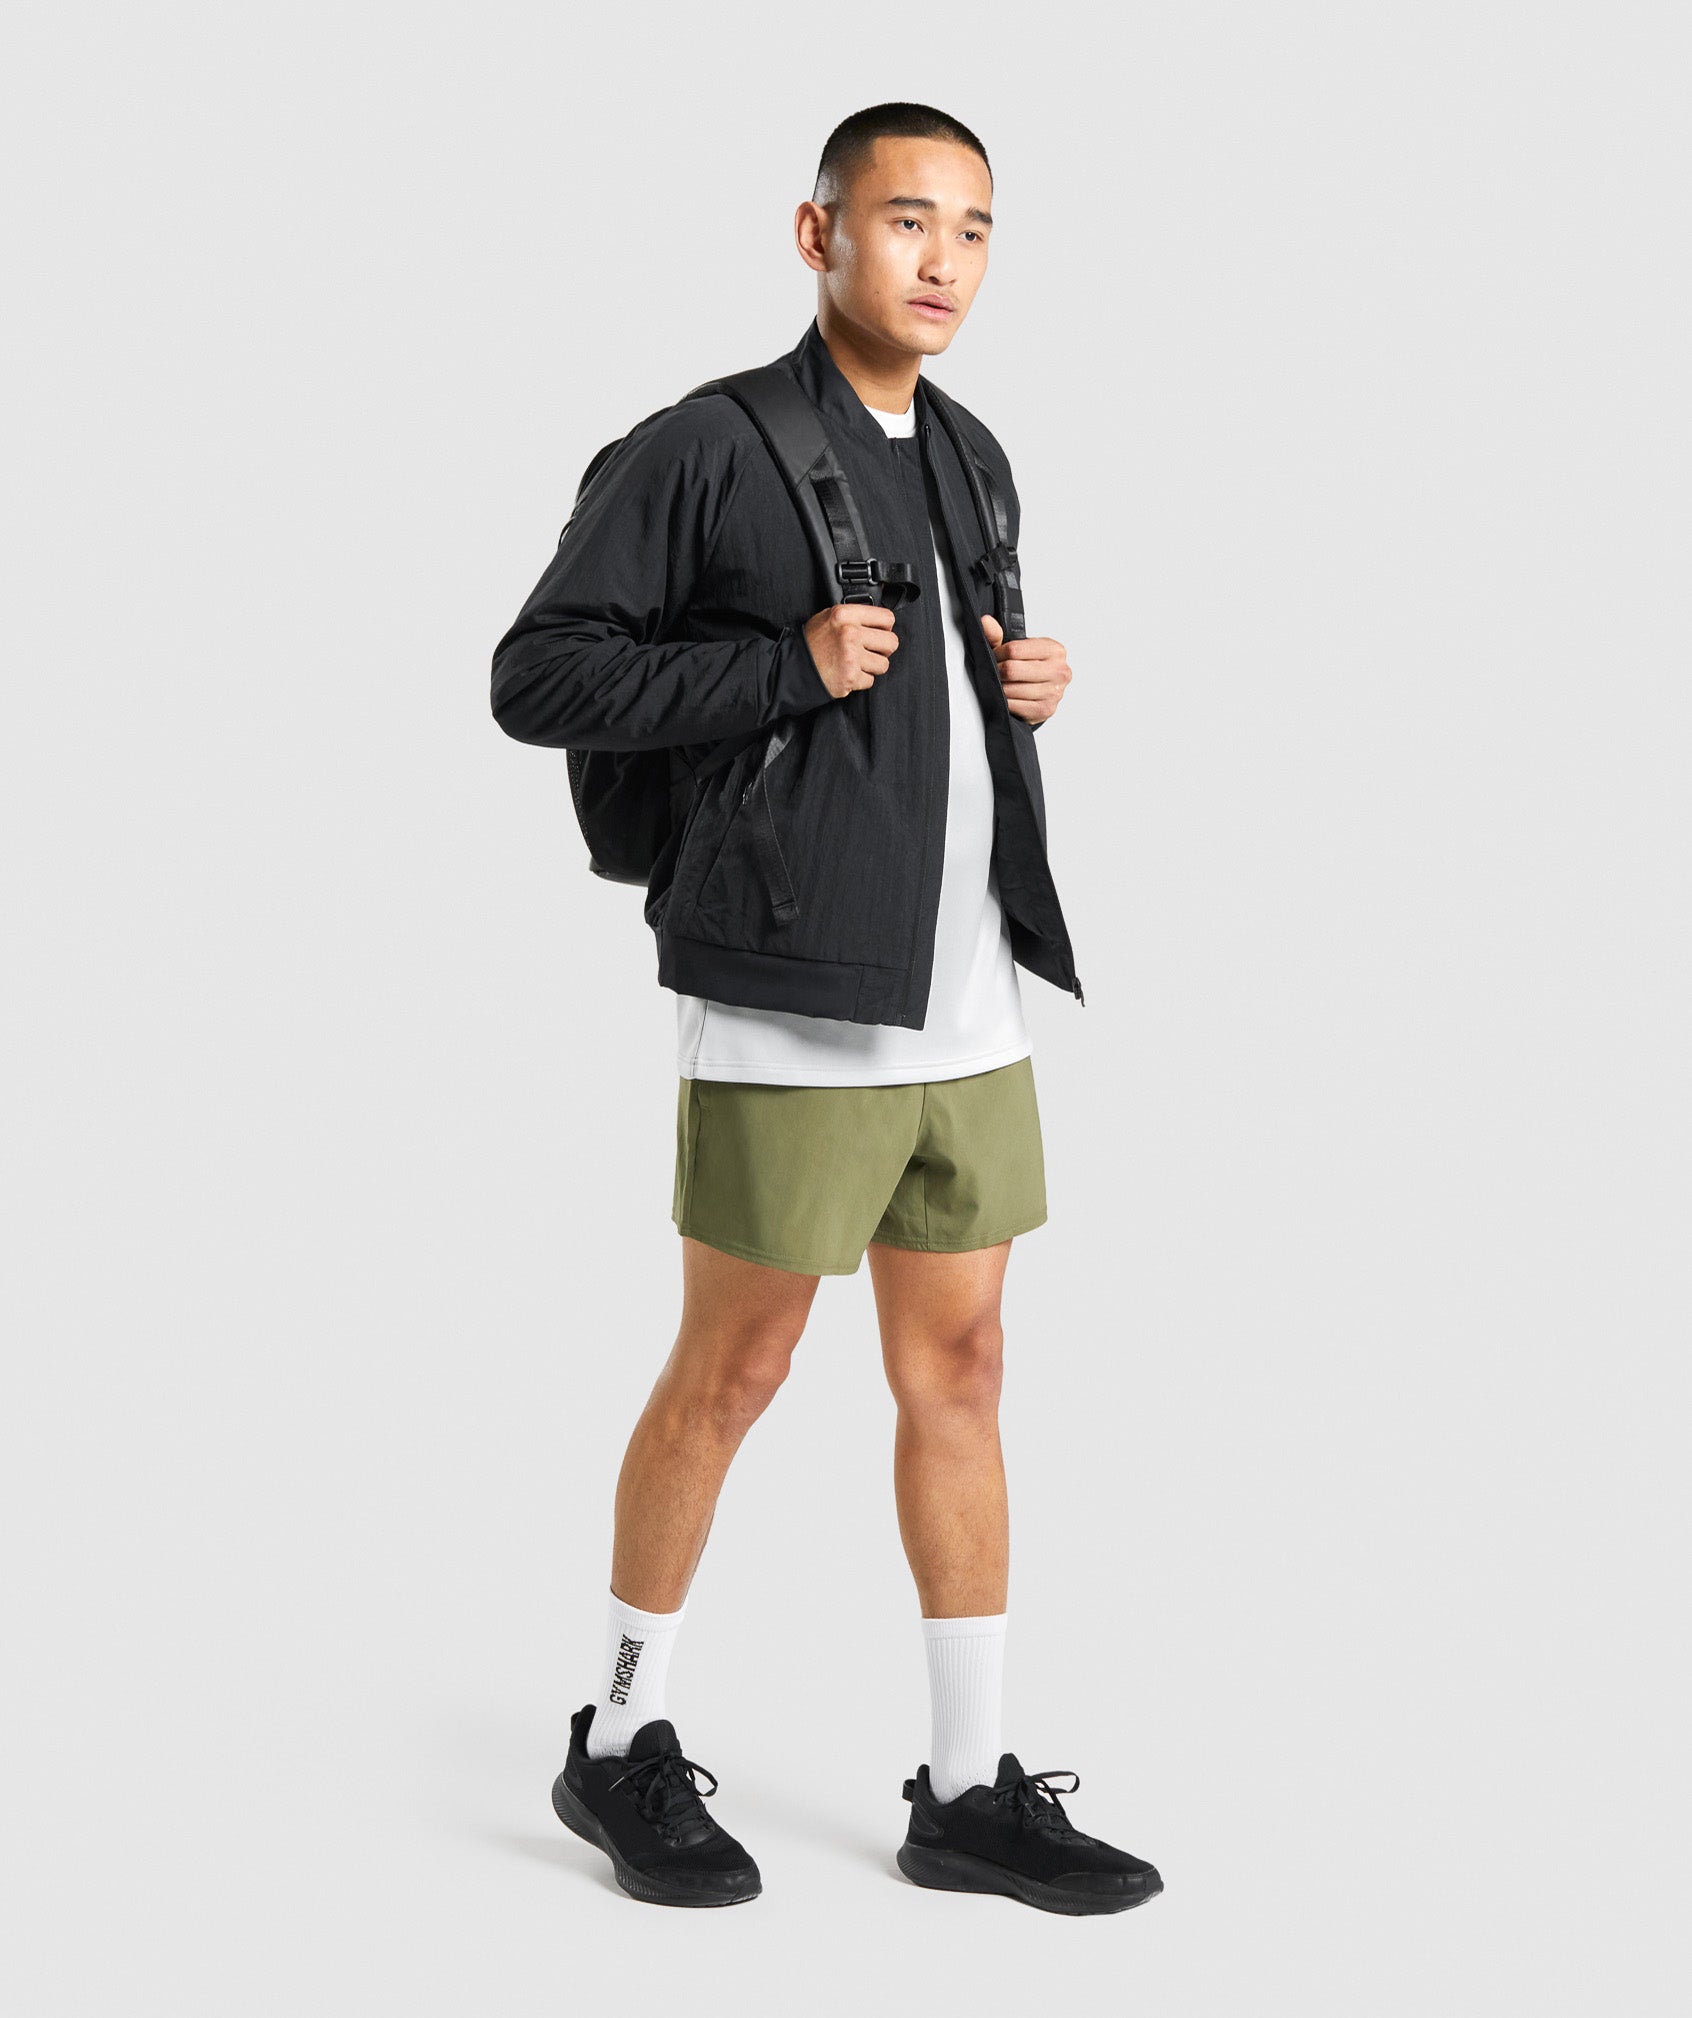 Arrival 5" Shorts in Dark Green - view 4